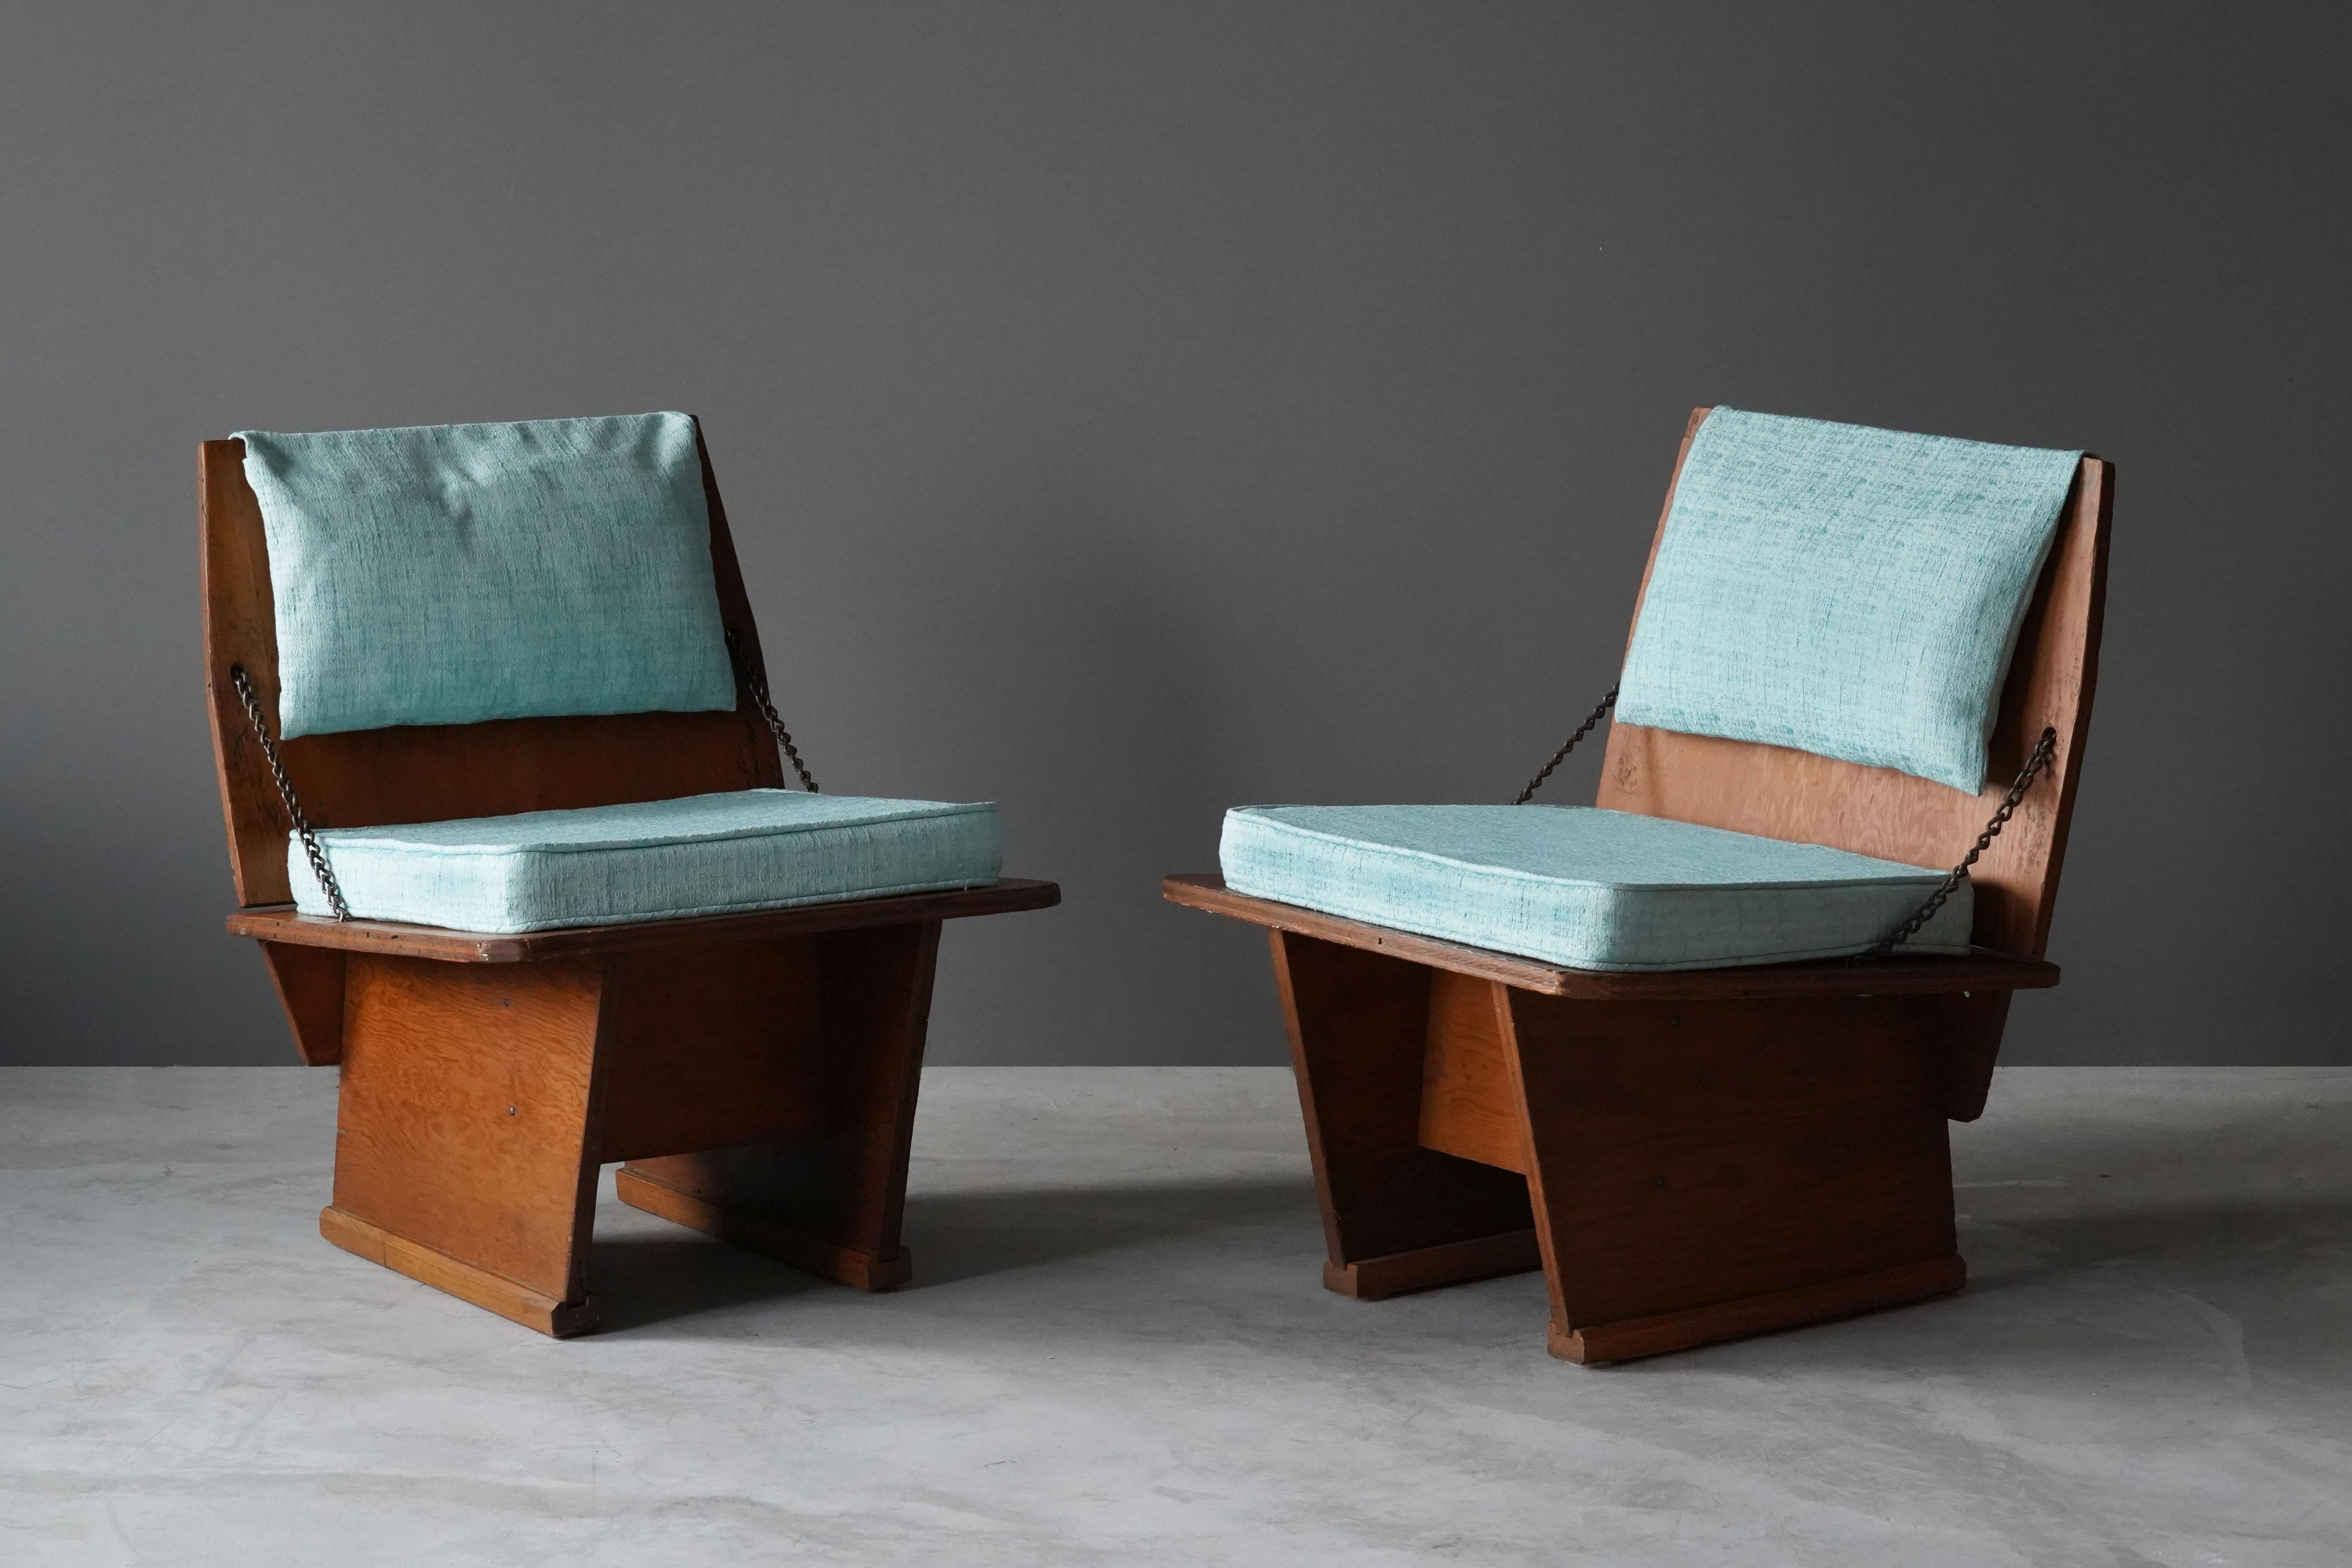 A rare pair of lounge chairs / slipper chairs designed by Frank Lloyd Wright produced by his Taliesin studio. Produced in limited numbers for Lloyd Wright's famous Unitarian Church in 1951. Marked. Purchase includes rare physical documentation.